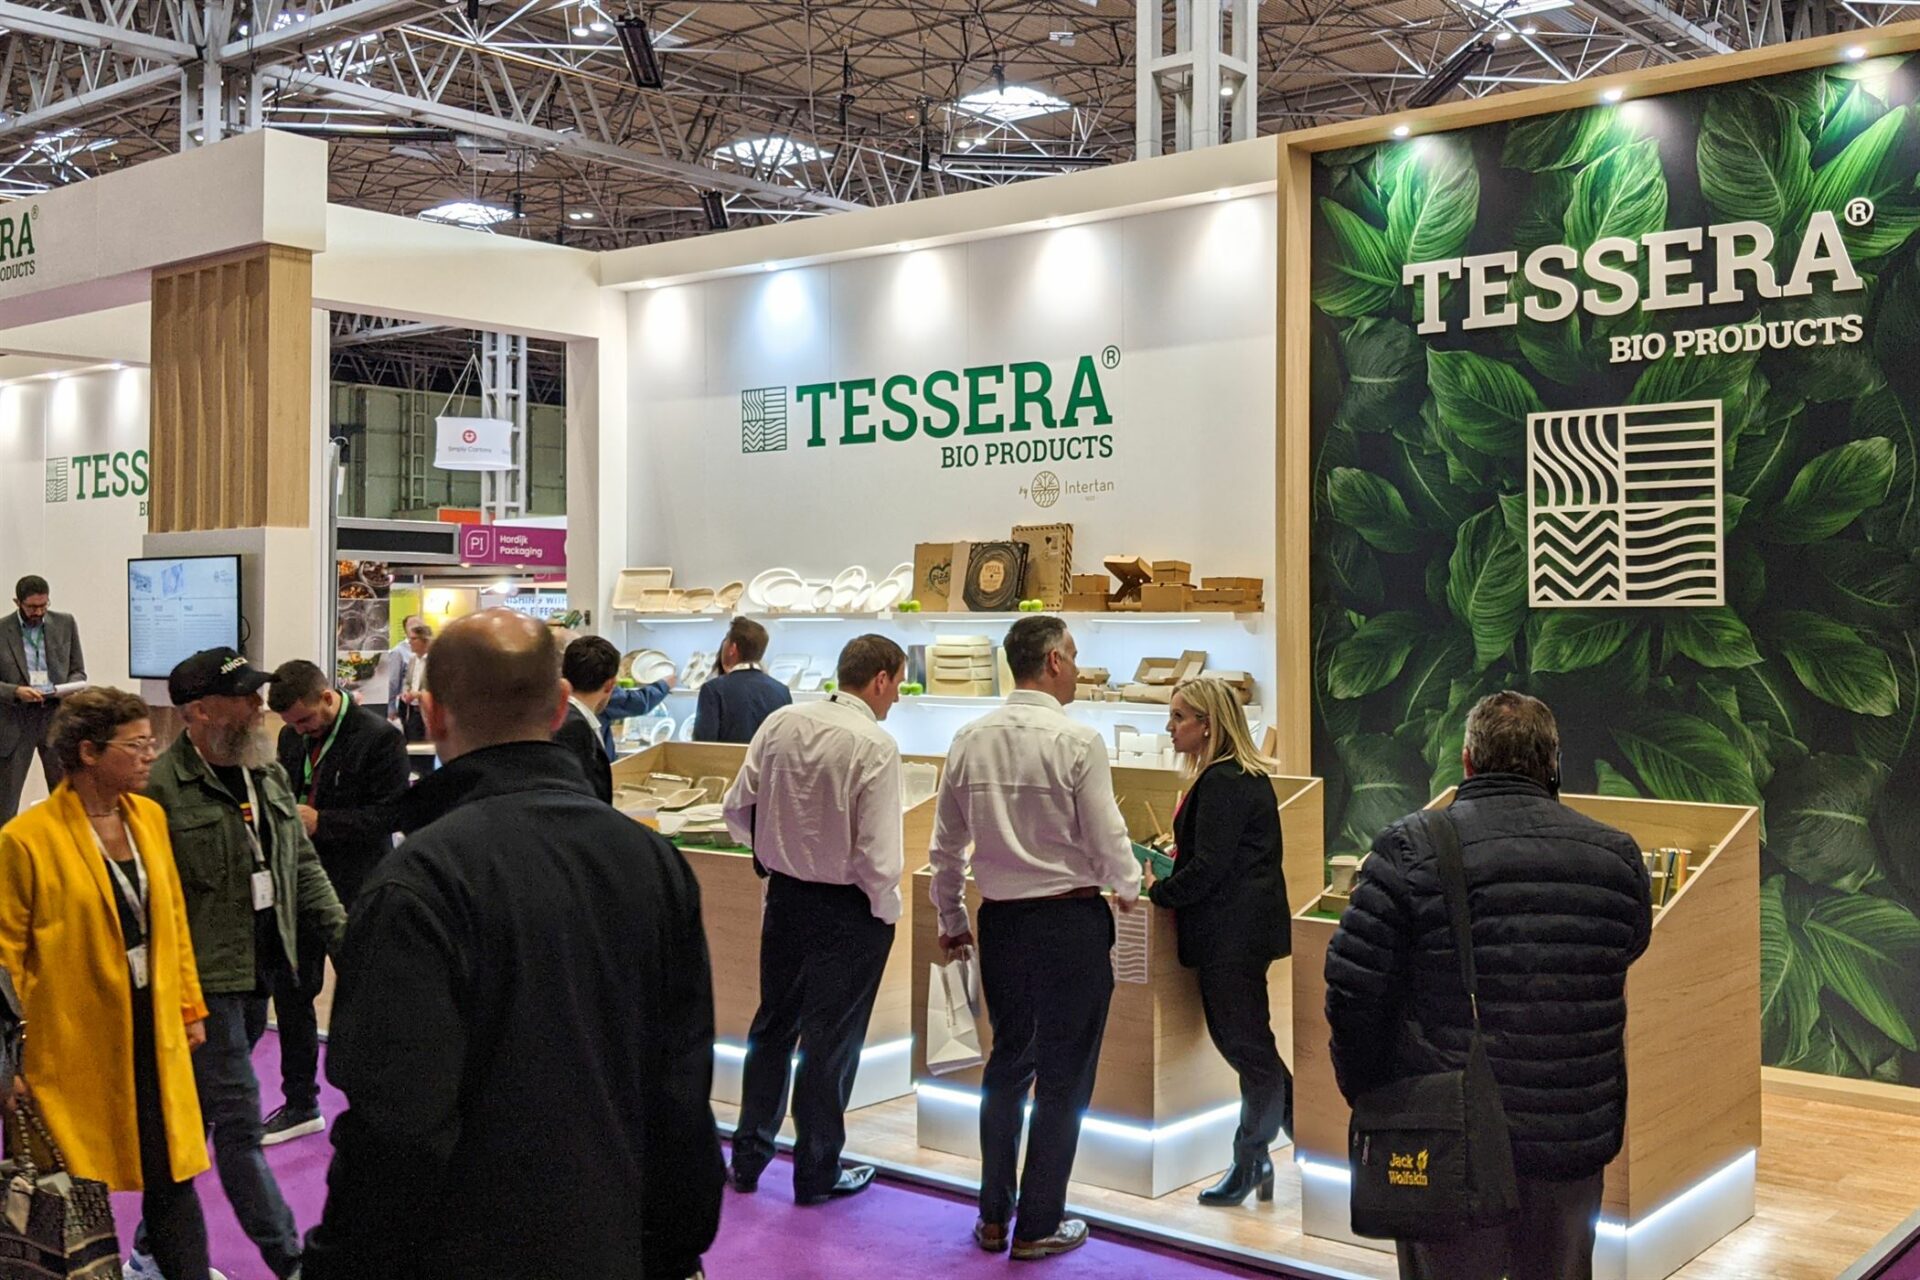 TESSERA Bio Products® in the UK for Packaging Innovations Expo | TESSERA Bio Products®